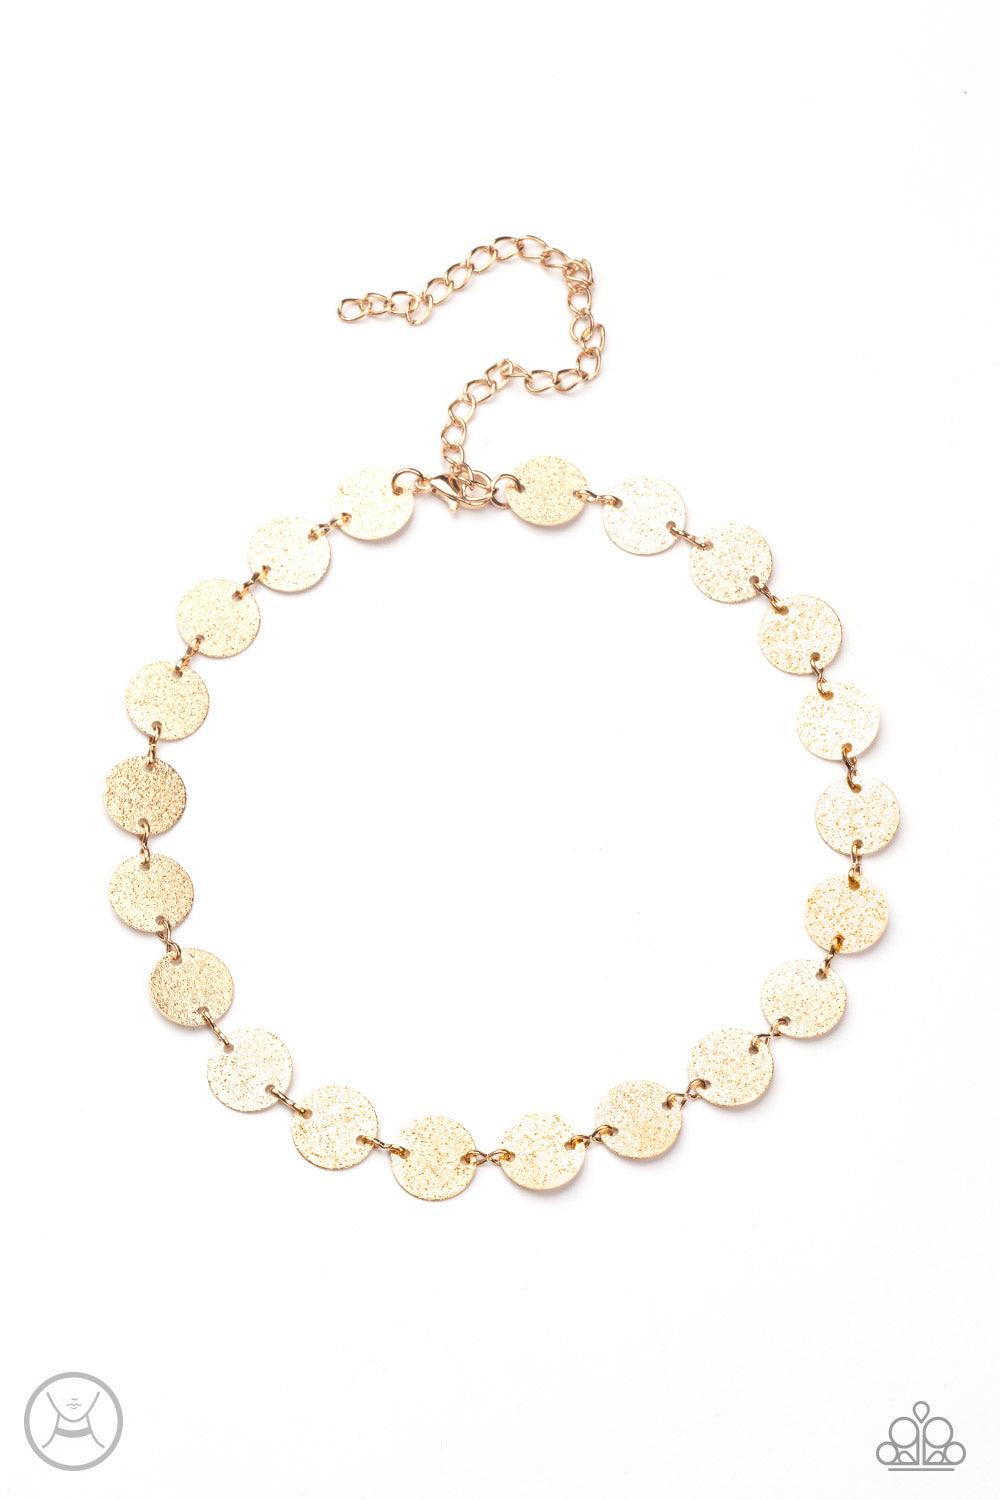 Paparazzi Accessories Reflection Detection - Gold Hammered in shimmery detail, a shiny collection of dainty gold discs delicately link into a blinding display around the neck. Features an adjustable clasp closure. Sold as one individual choker necklace. I